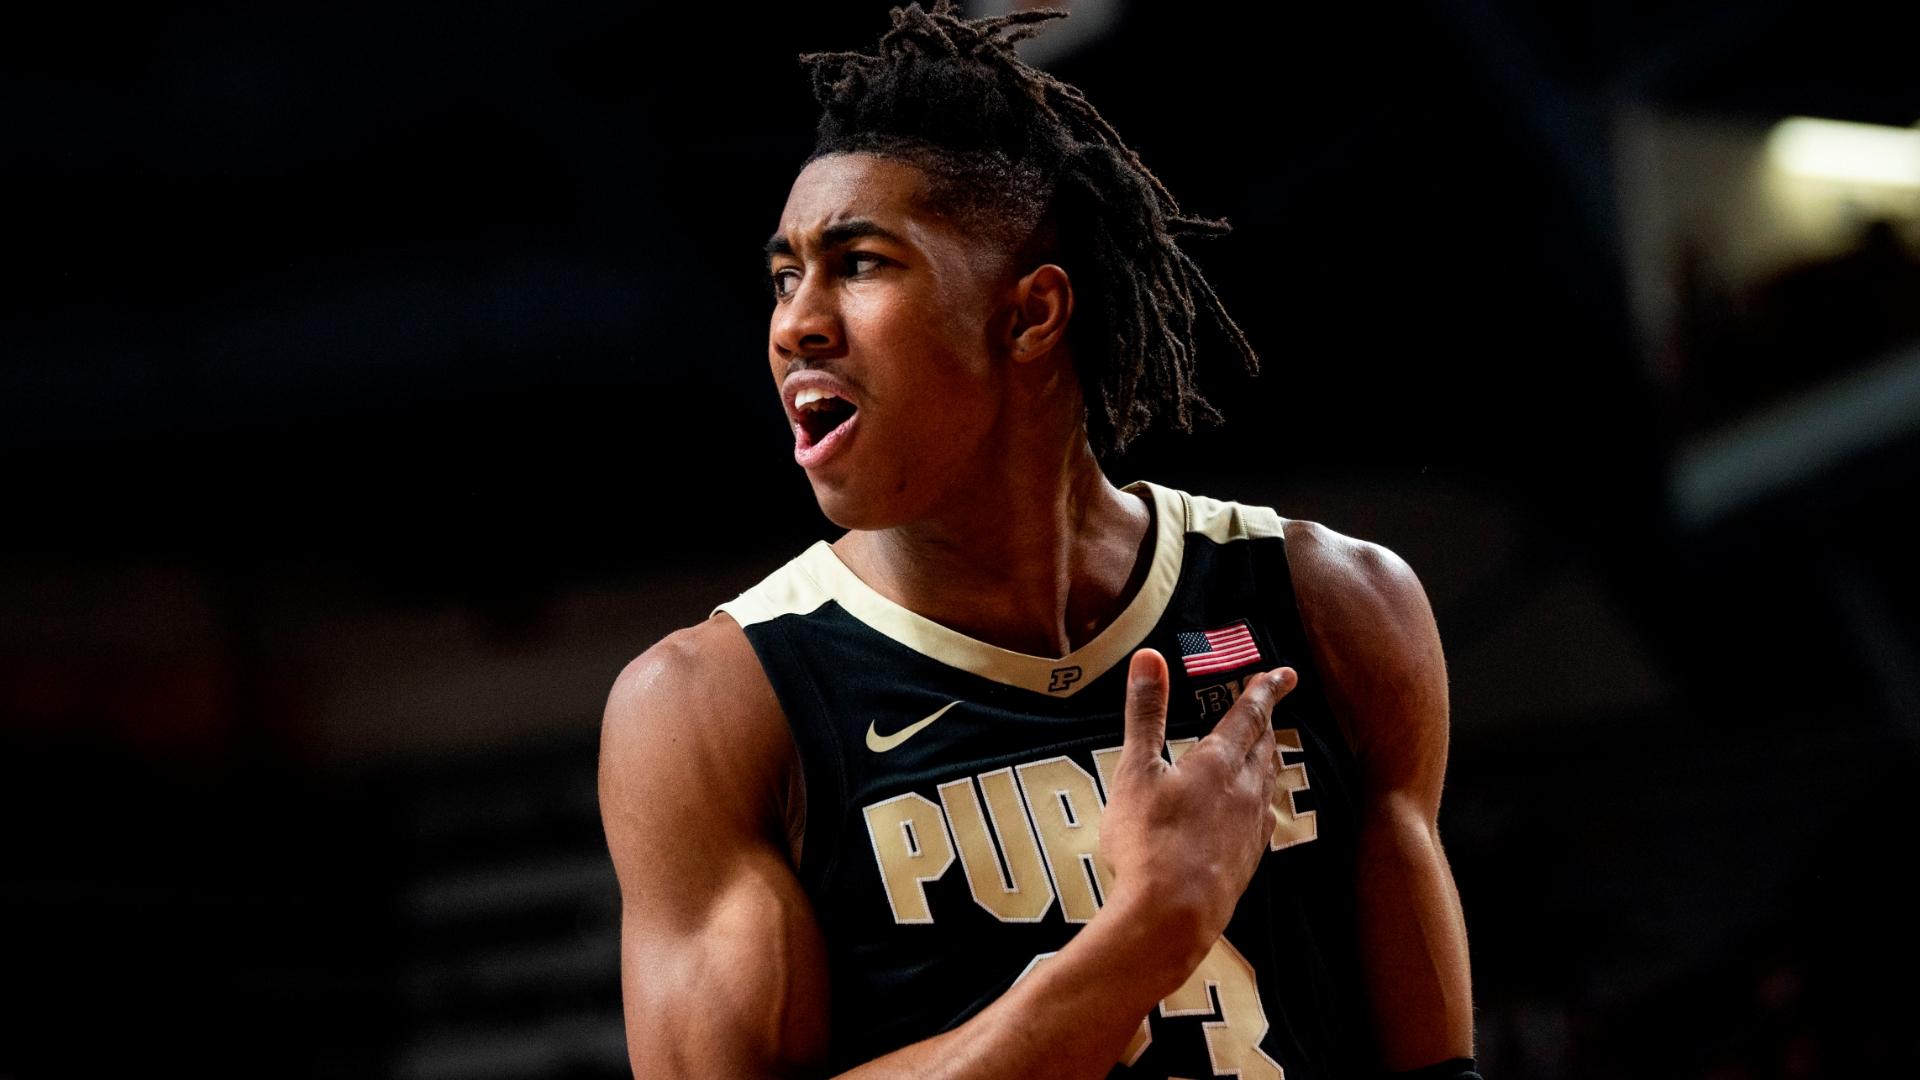 SN Draft Lab: Could Purdue's Jaden Ivey become the best prospect in the 2022 NBA Draft class?